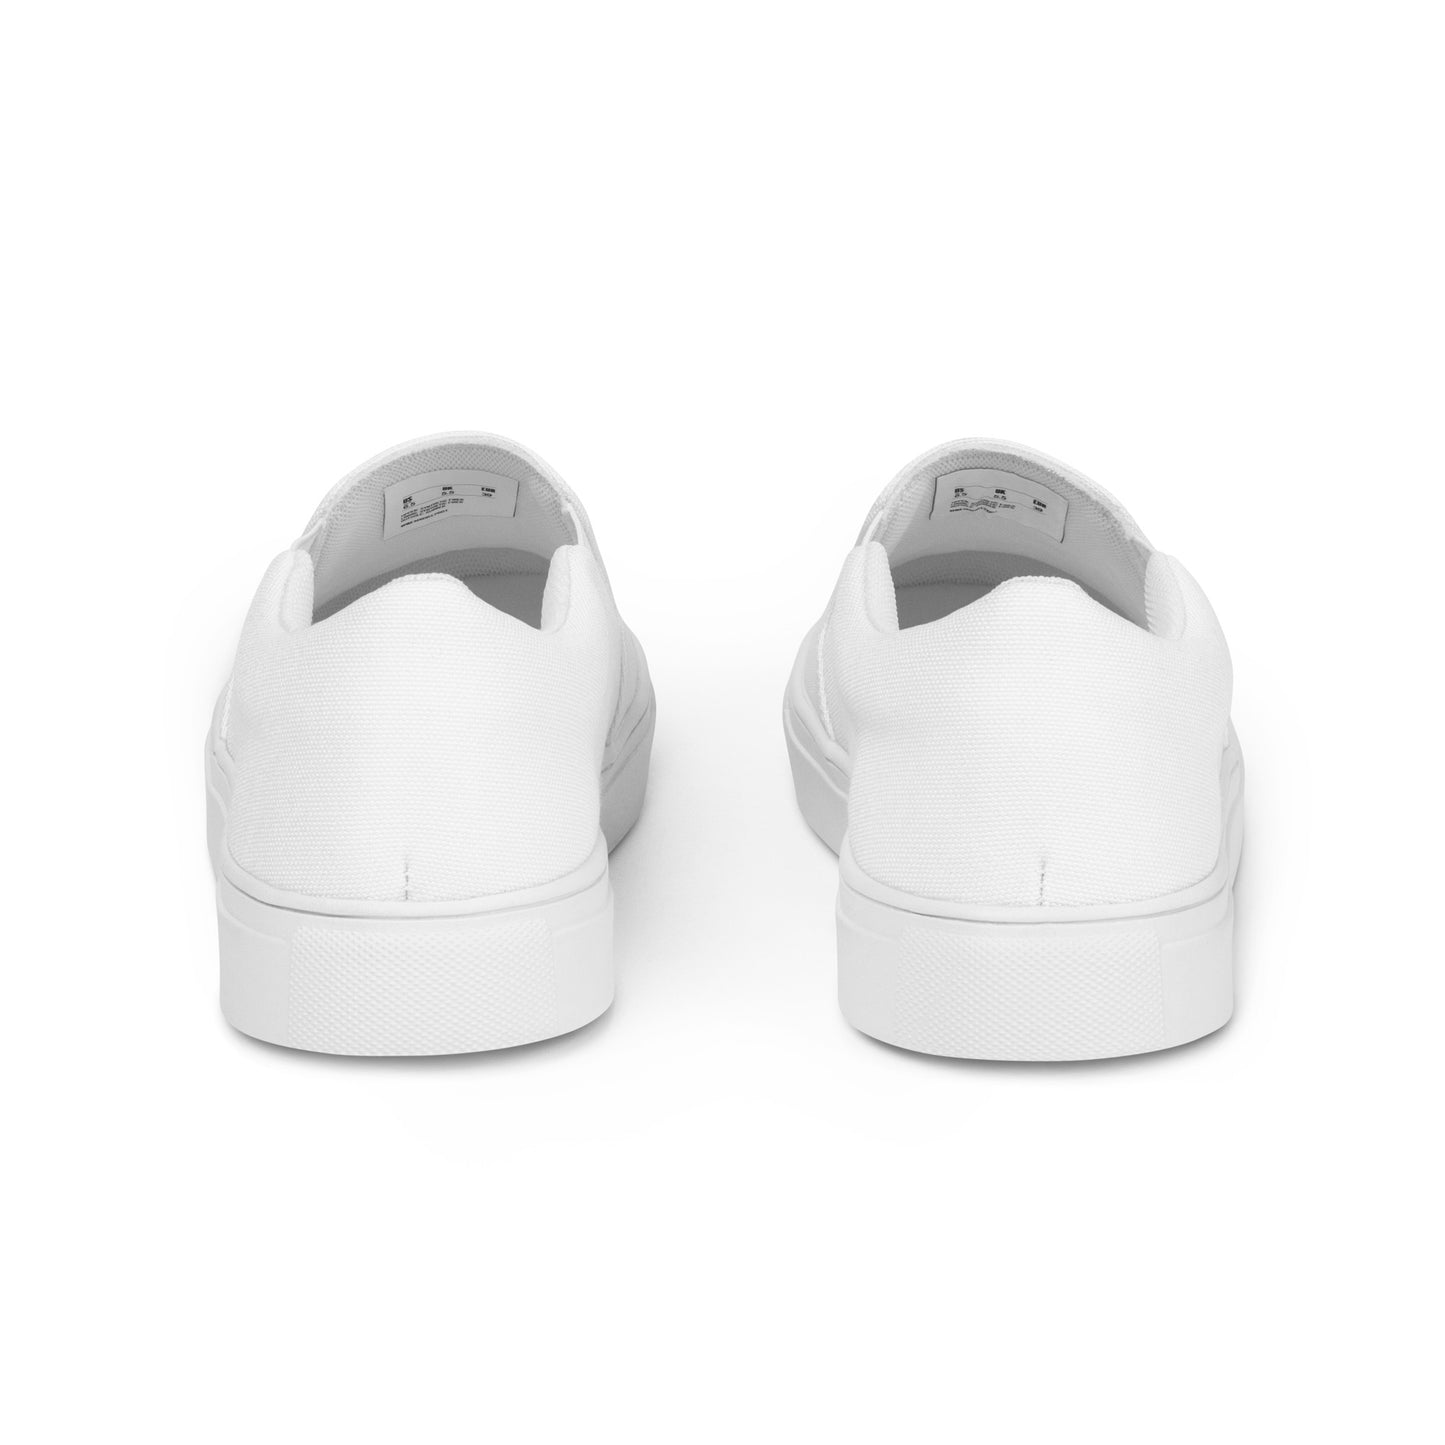 Men’s Slip-on Canvas Shoes - Banamerica Collection